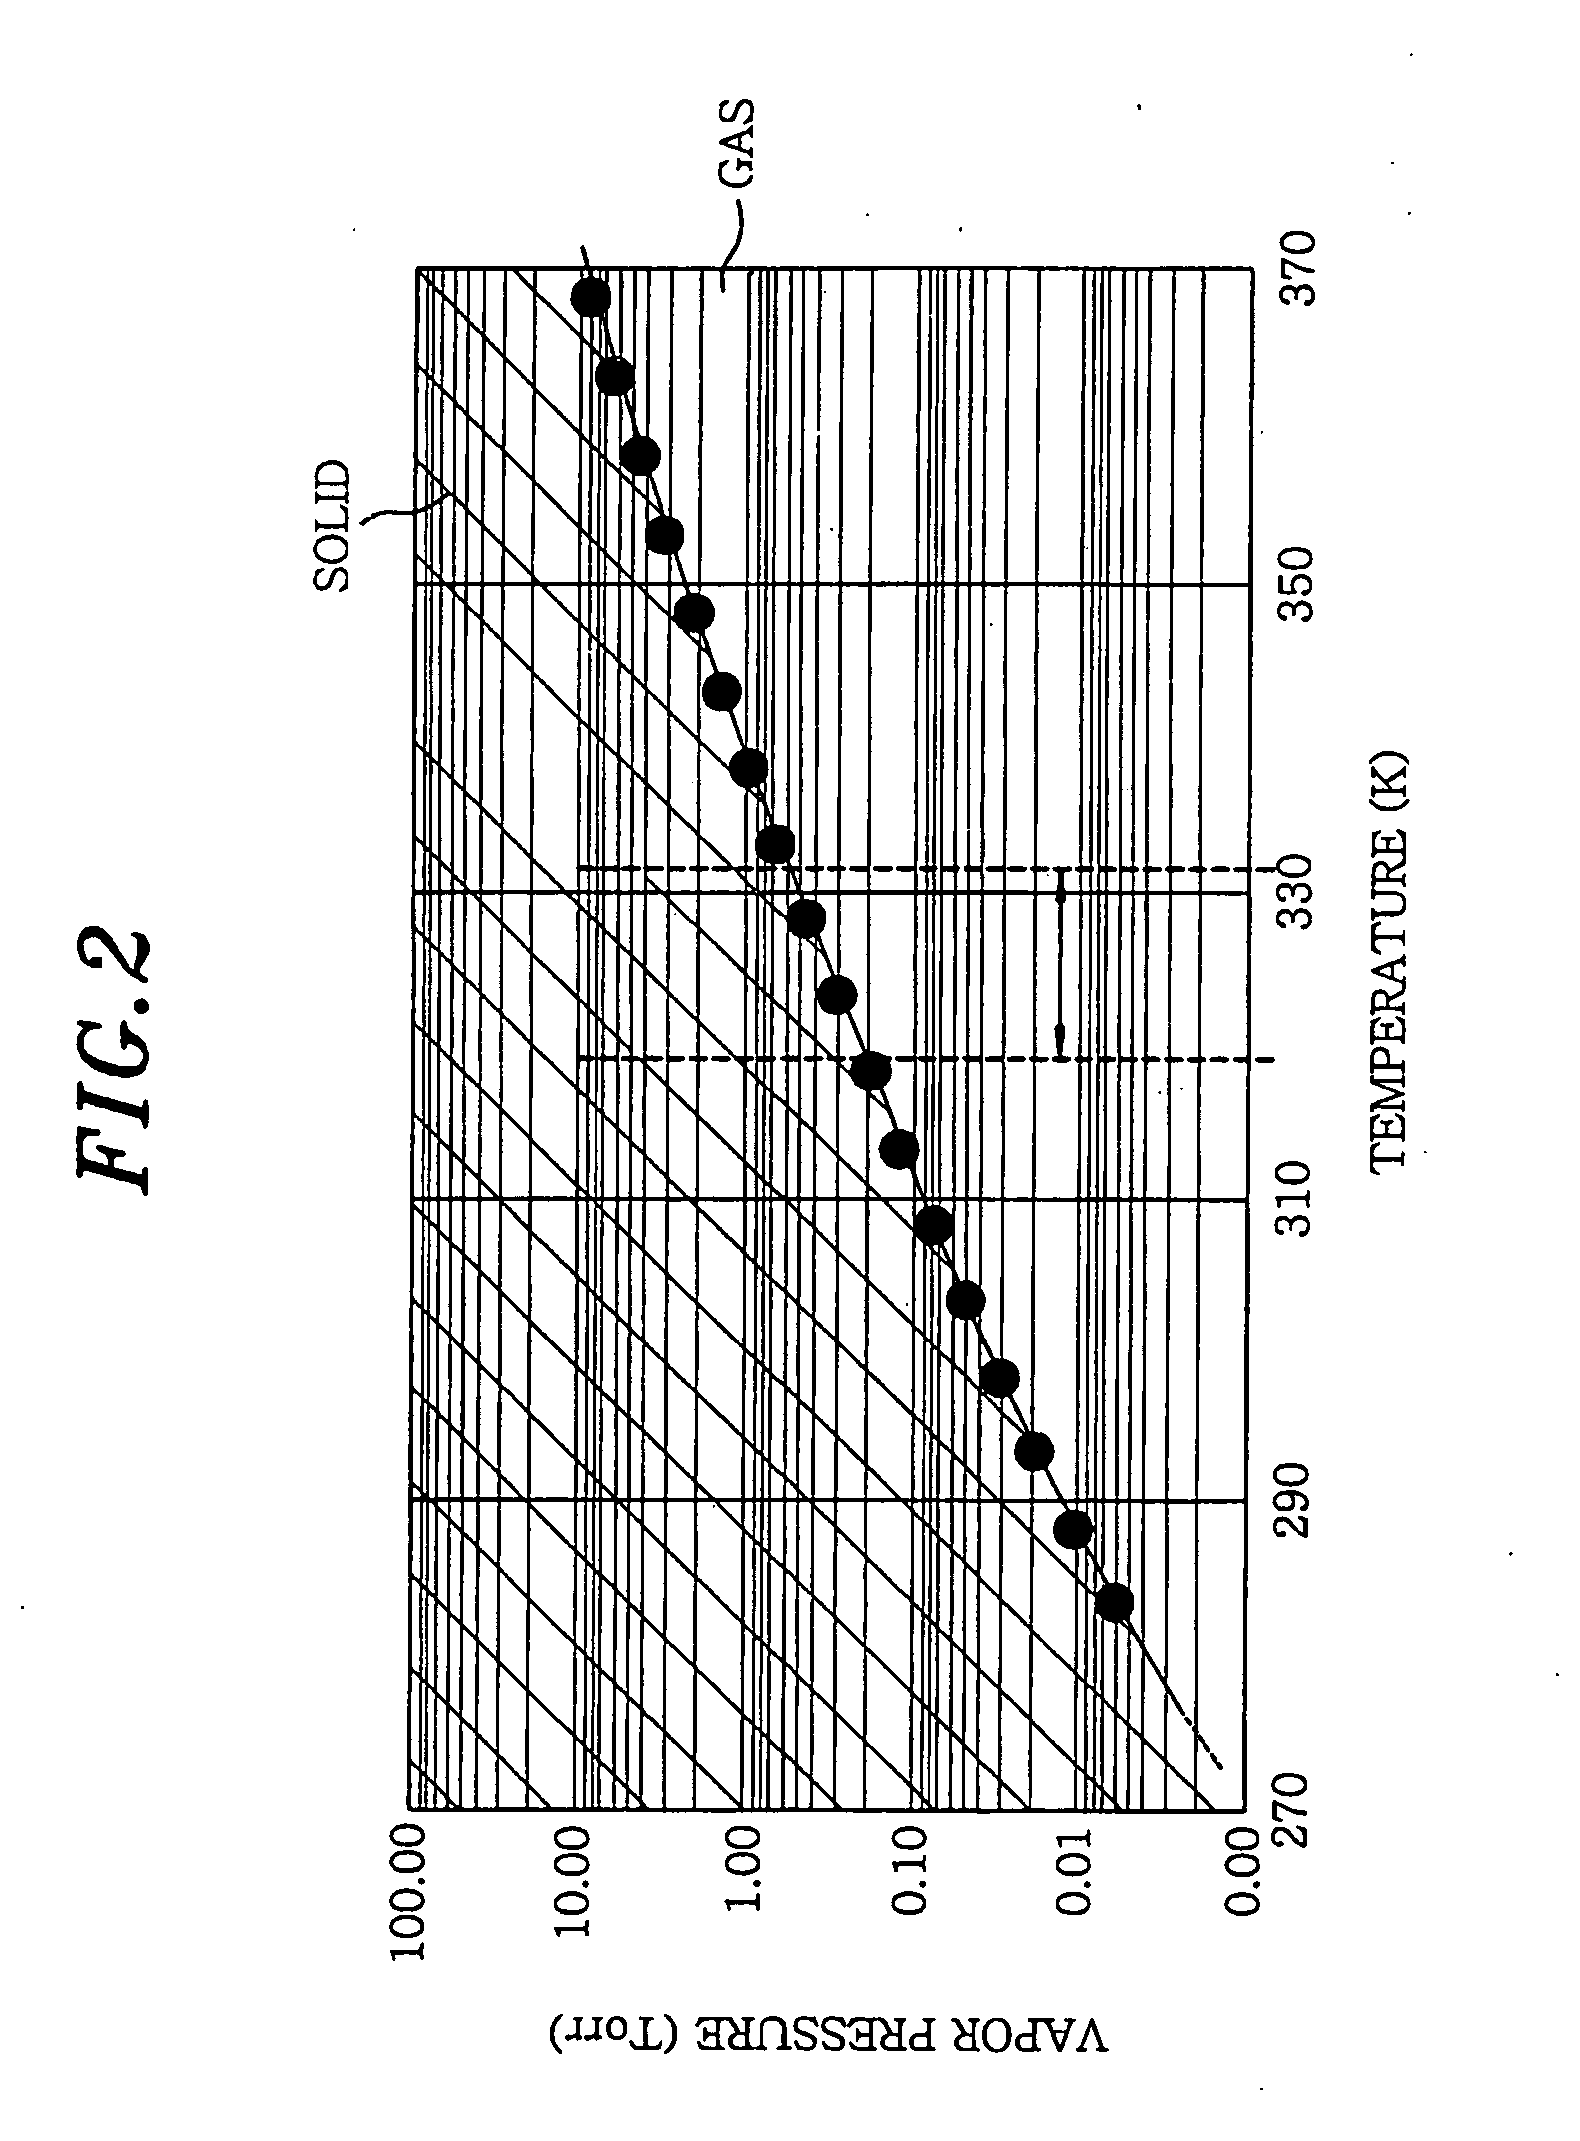 Processing gas supply mechanism, film forming apparatus and method, and computer storage medium storing program for controlling same